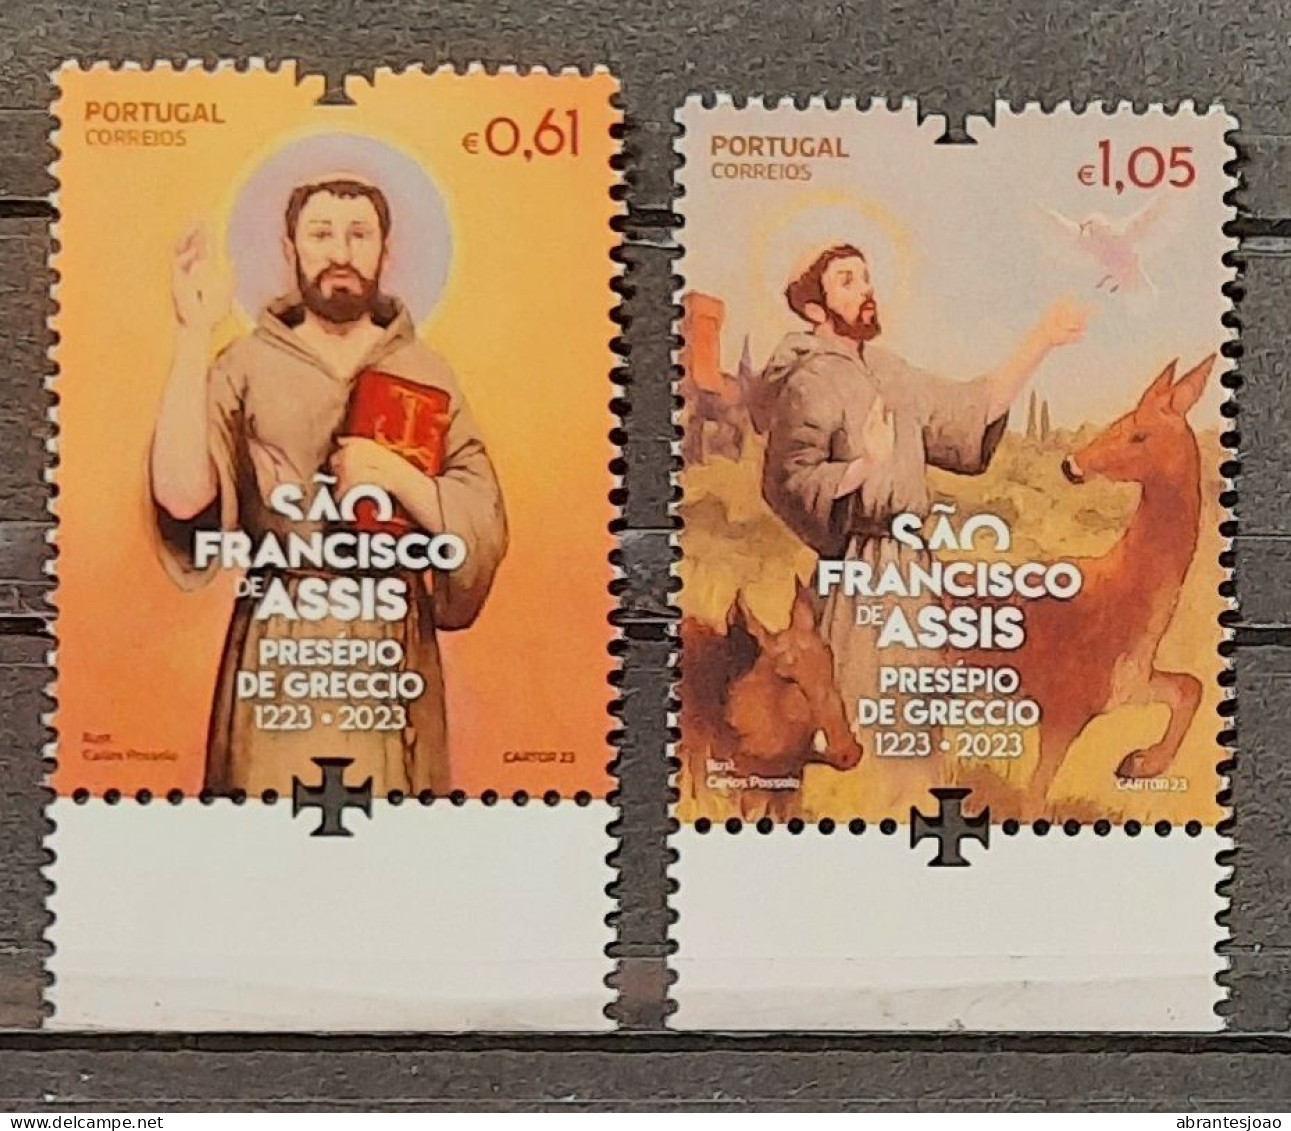 2023 - Portugal - MNH - Saint Francis Of Assis - Presepius Of Greccio - 1223/2023 - 2 Stamps - Unused Stamps